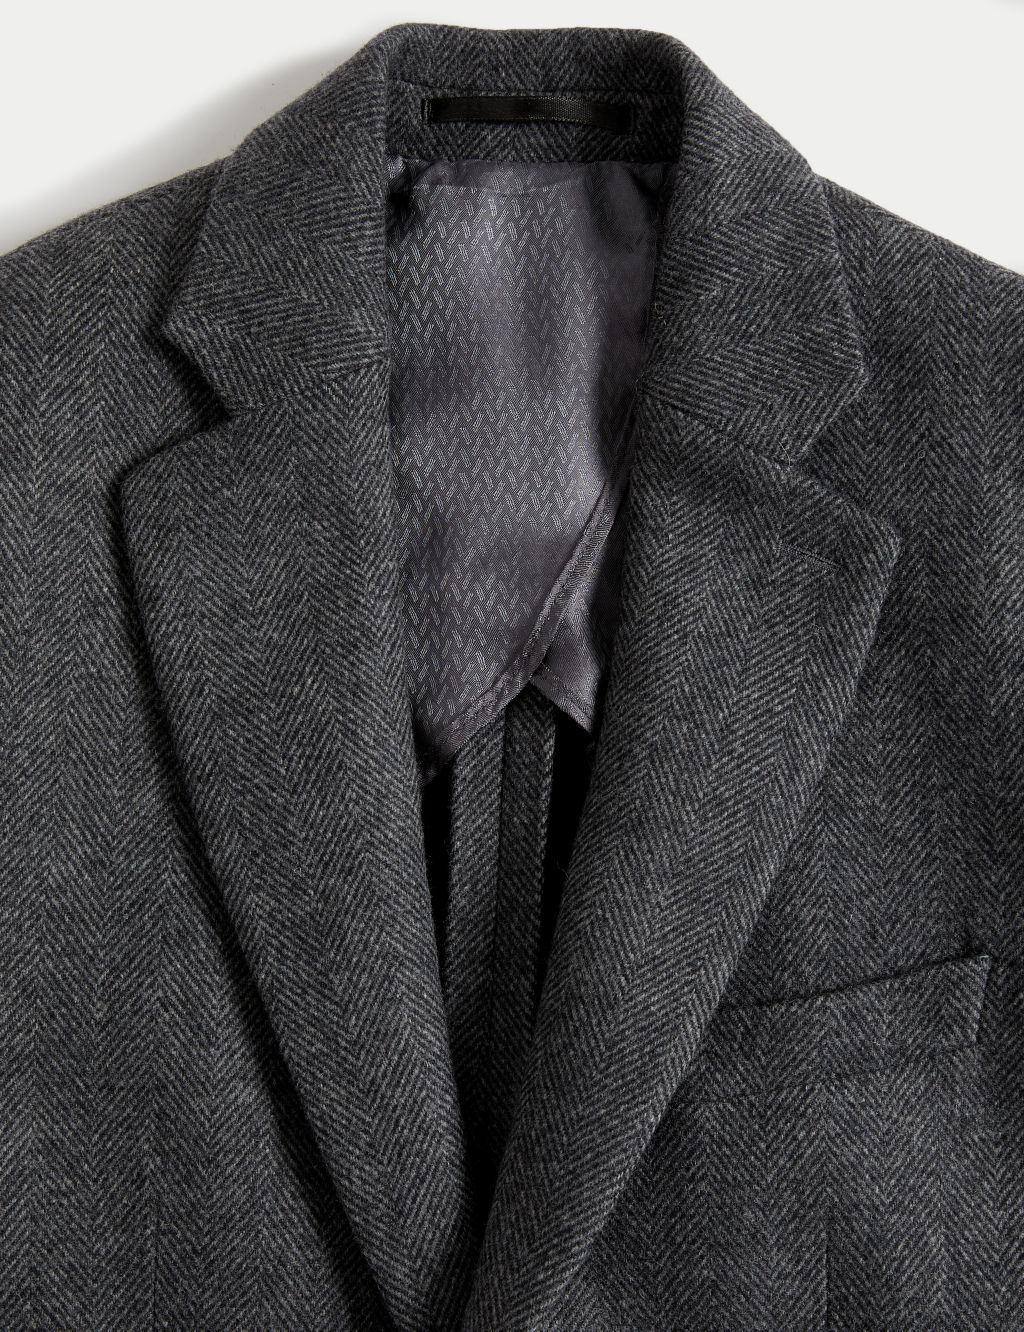 Tailored Fit Wool Rich Suit Jacket image 3